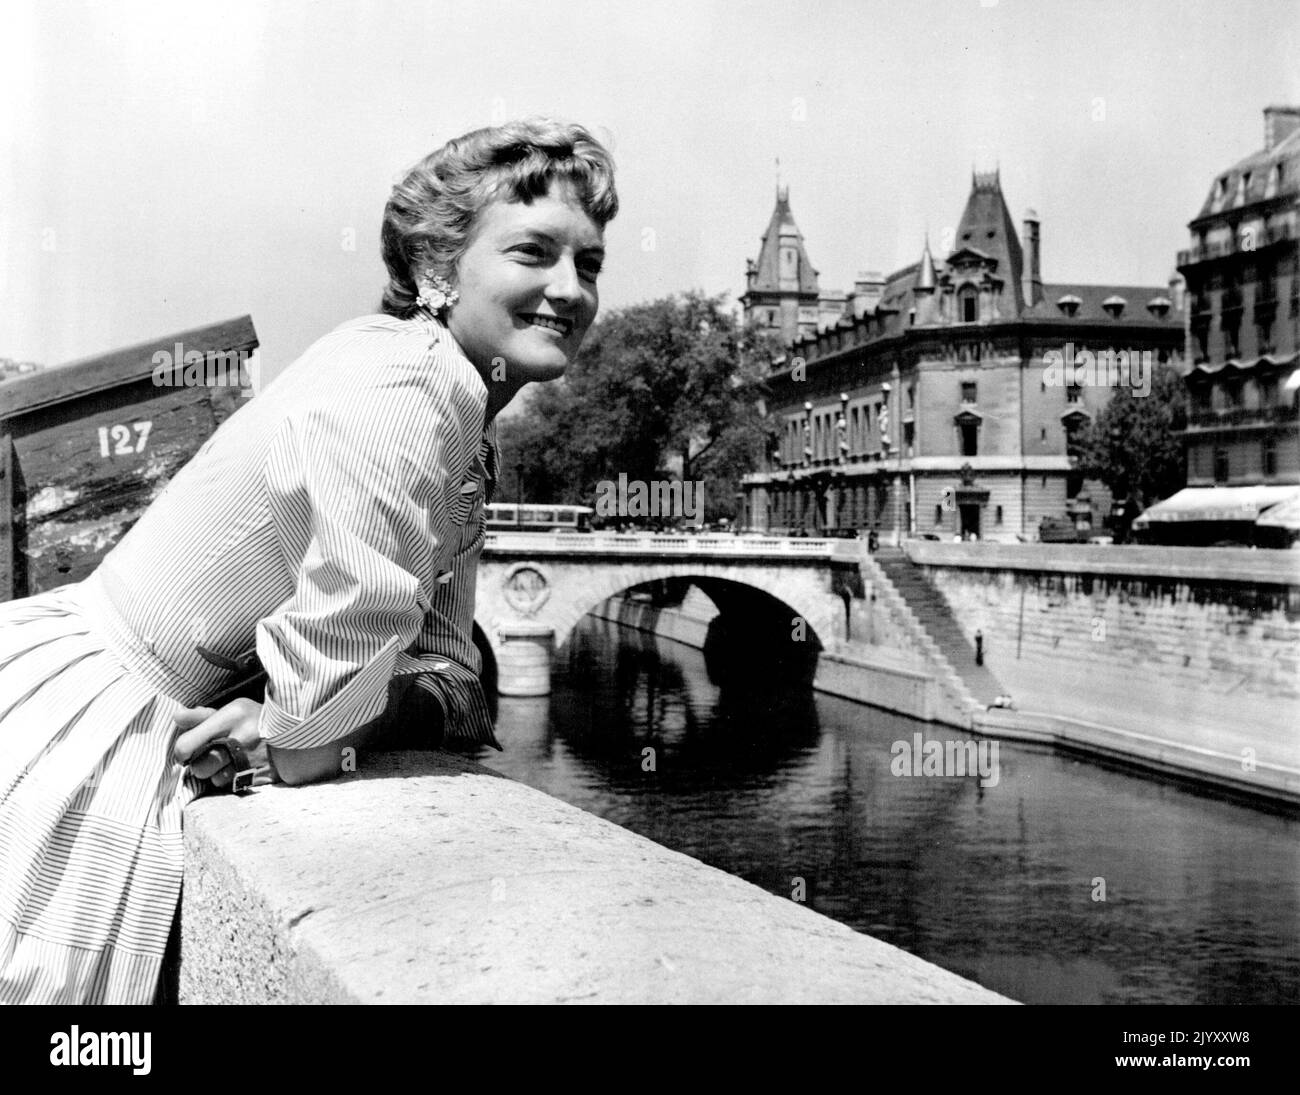 Oakes - Australia's champion, Beryl Penrose, who reached the quarterfinals of the French titles, loved the Seine quais, where one can lean and watch the river, admire the bridges and the old buildings and lift one's eyes to the Gothic towers of Notre Dame. June 21, 1955. (Photo by Michel Brodsky). Stock Photo